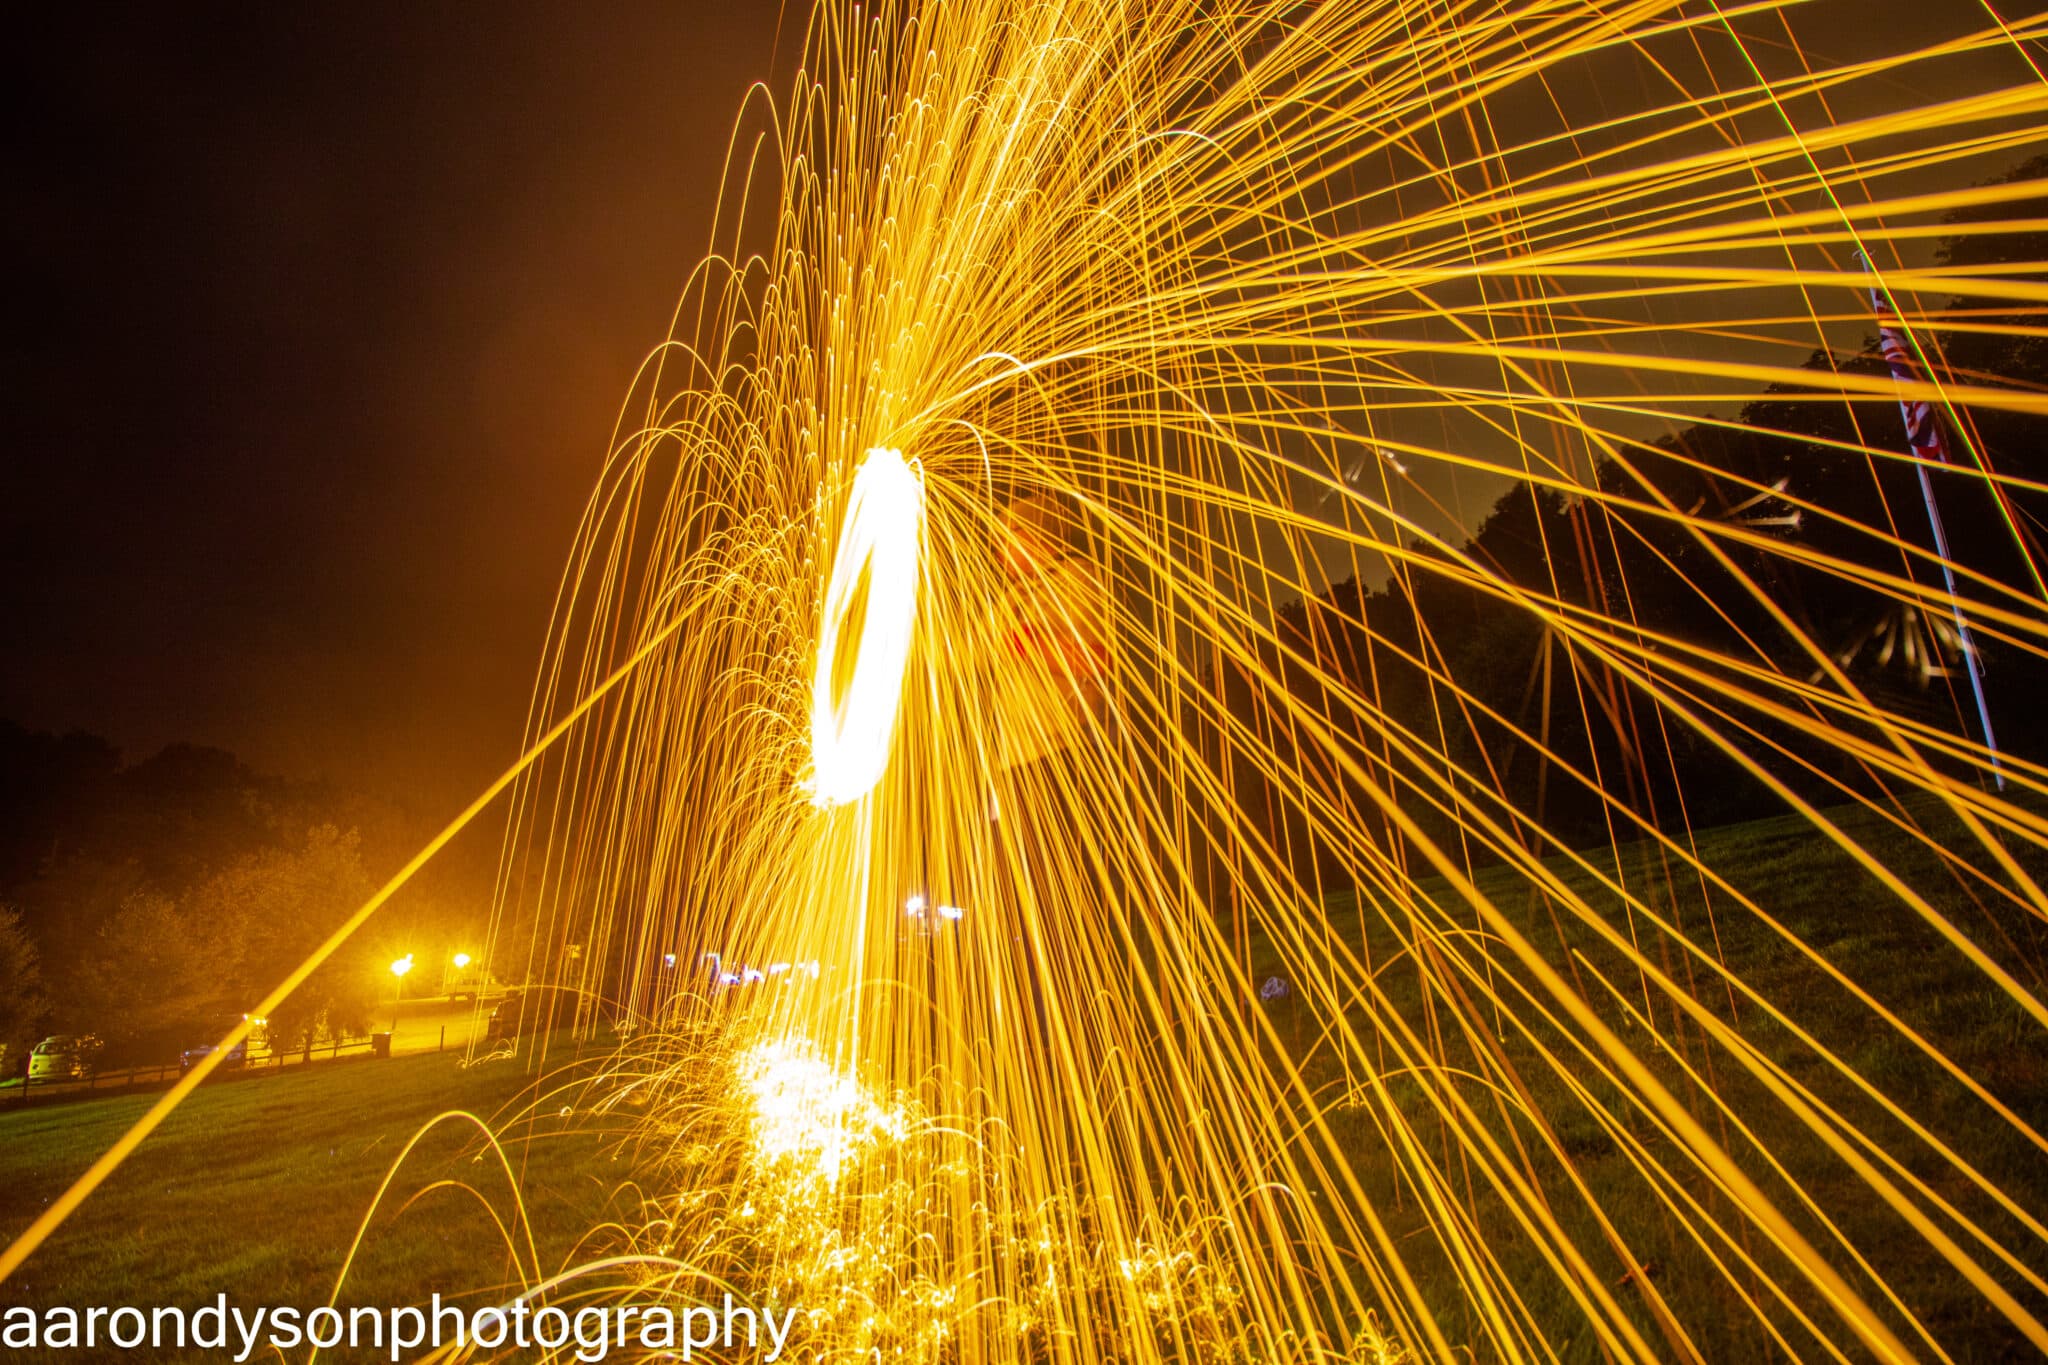 Sparks flying at night